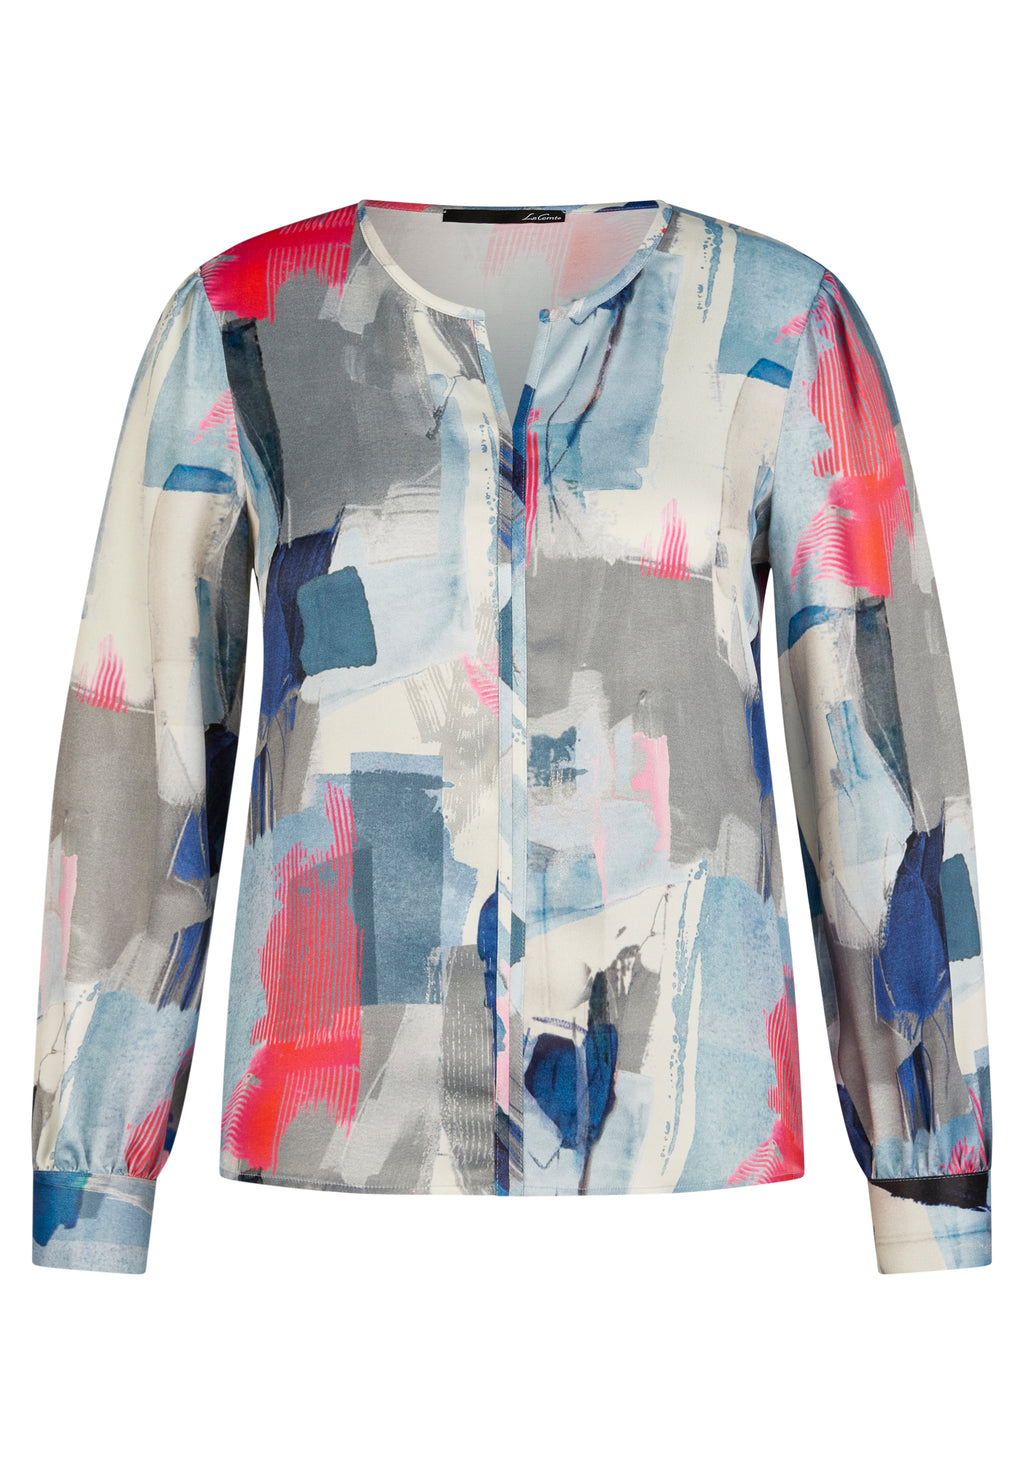 <p>Le Comte colour splash collection printed blouse with long sleeves and a satin feel</p>
<p>Product code 52-613100</p>
<p> </p>